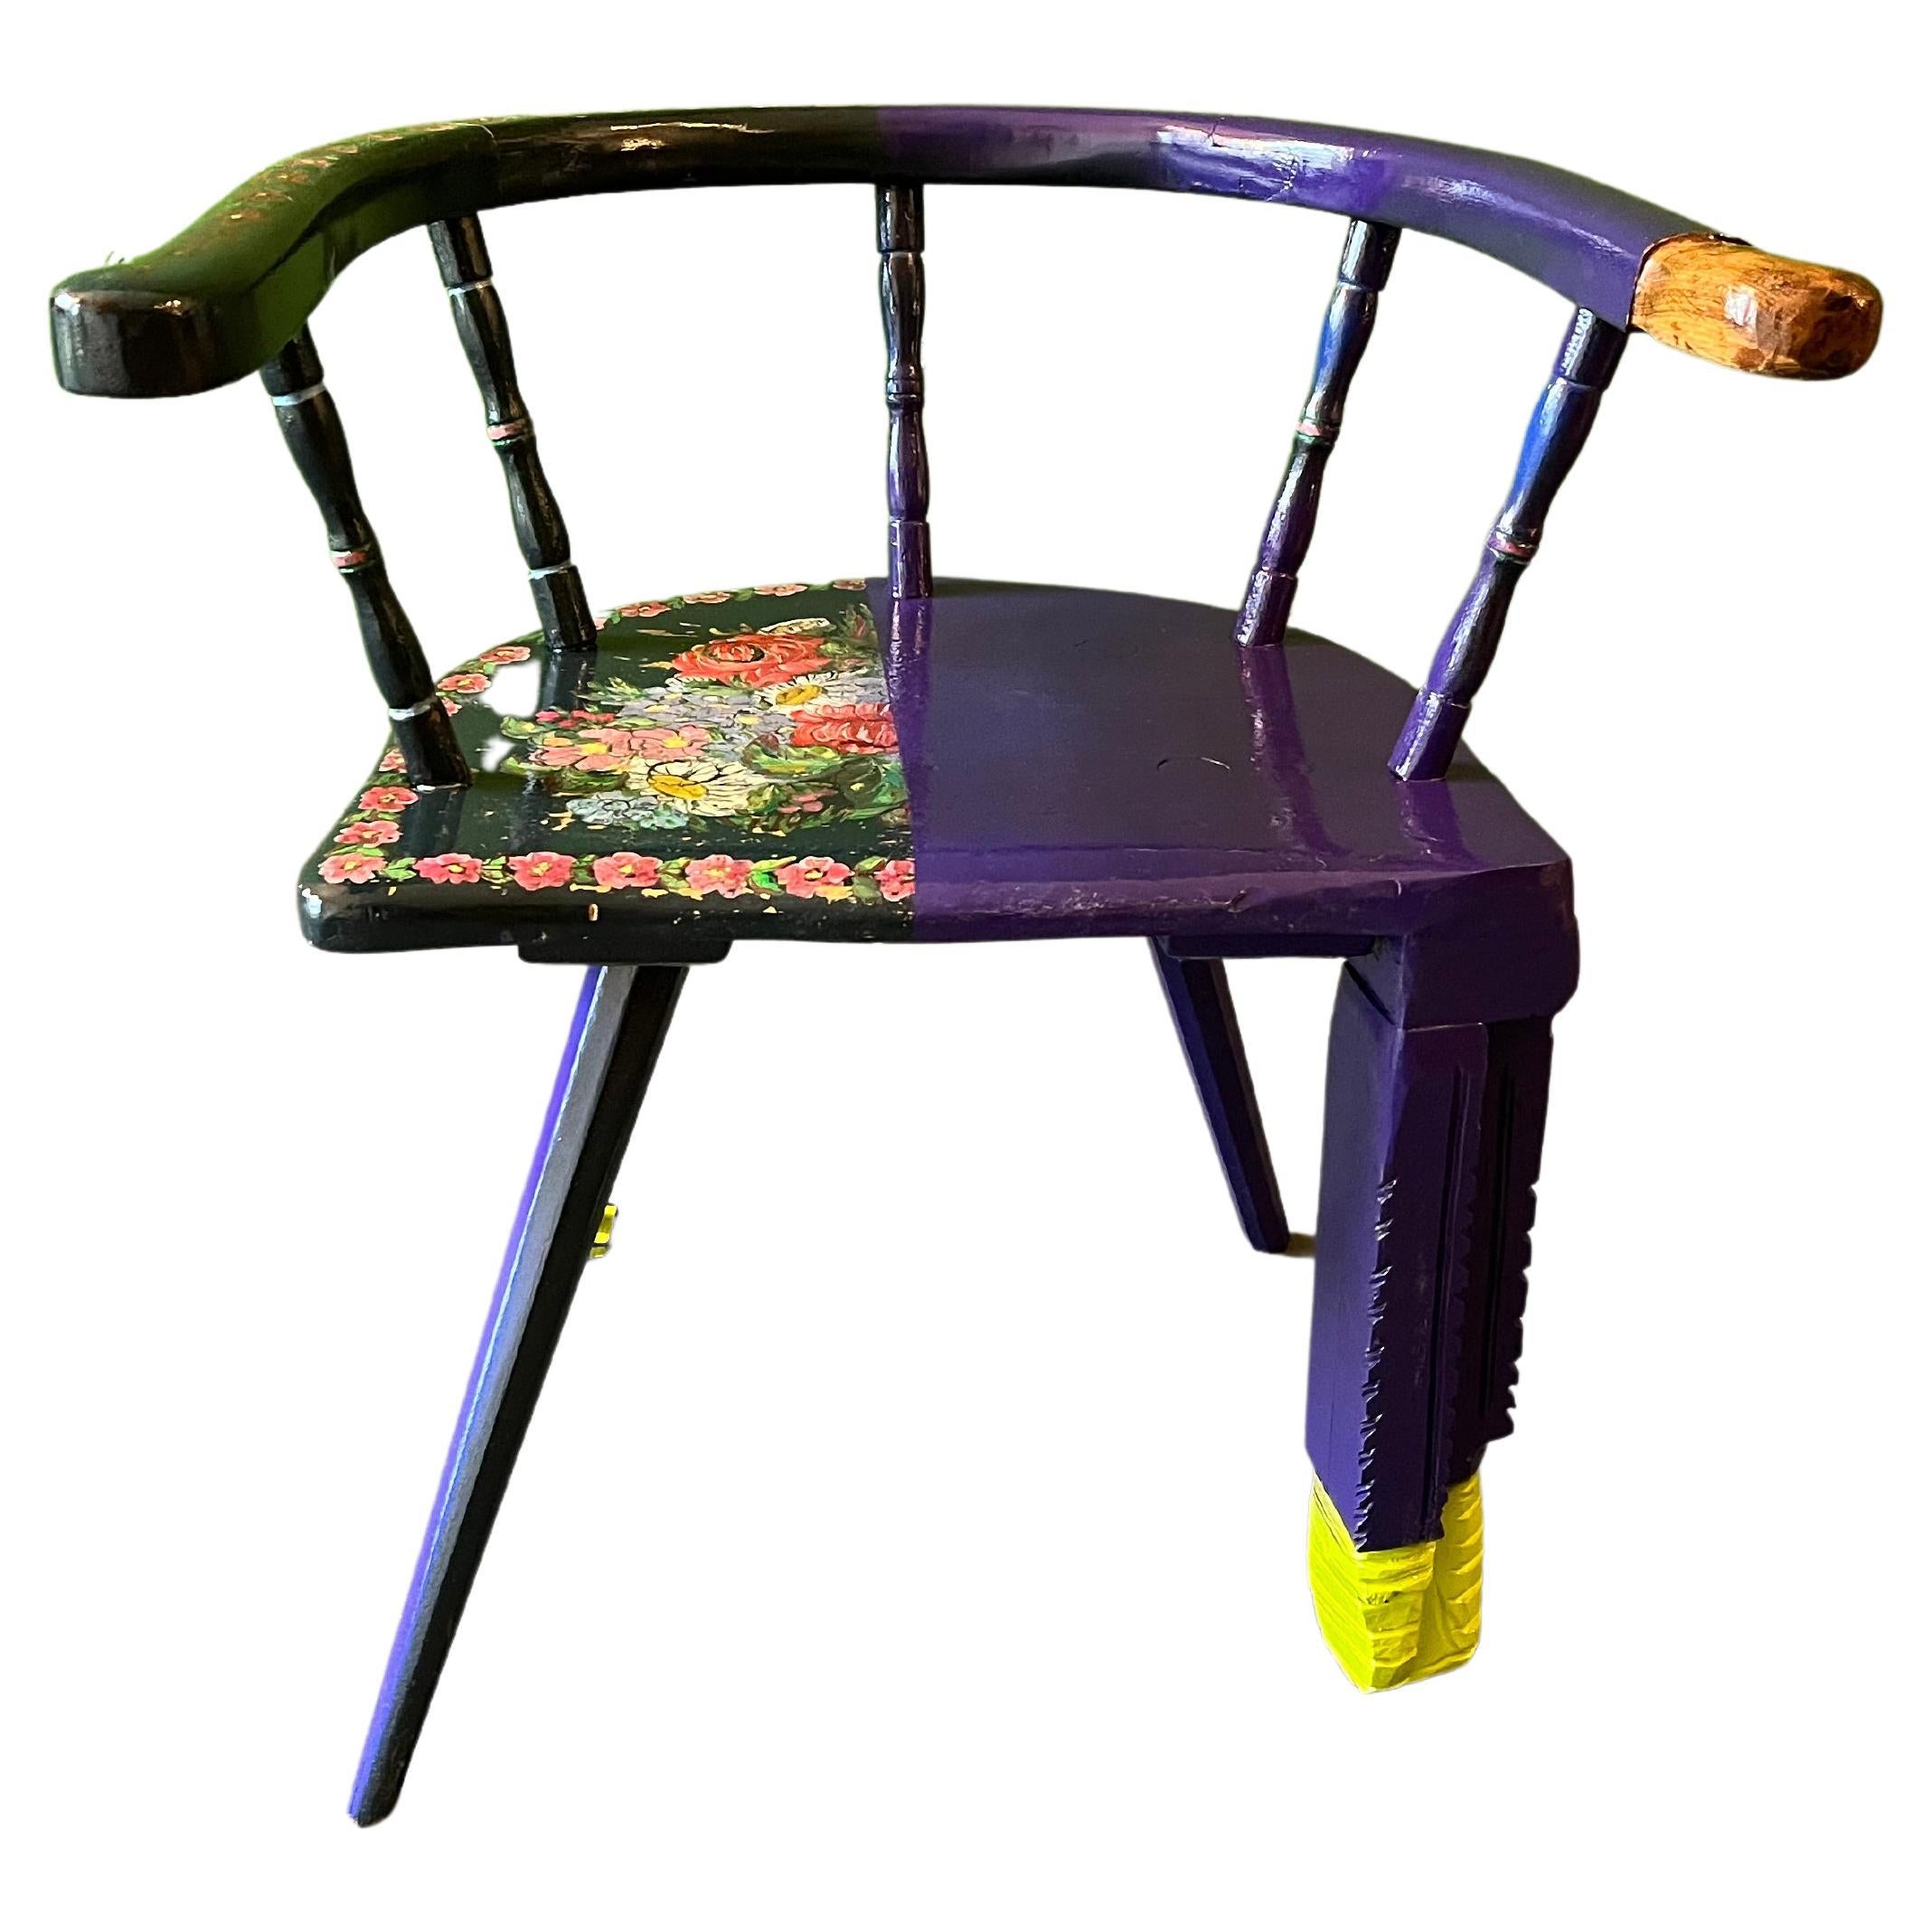 Handpainted farm chair from Bavaria, painted flowers in Oil. Multi-lacquered, sculptural leg added.
Through my work I transform each chair into a unique and individual object. Chairs that once were mass-produced and homogenous, become singular and